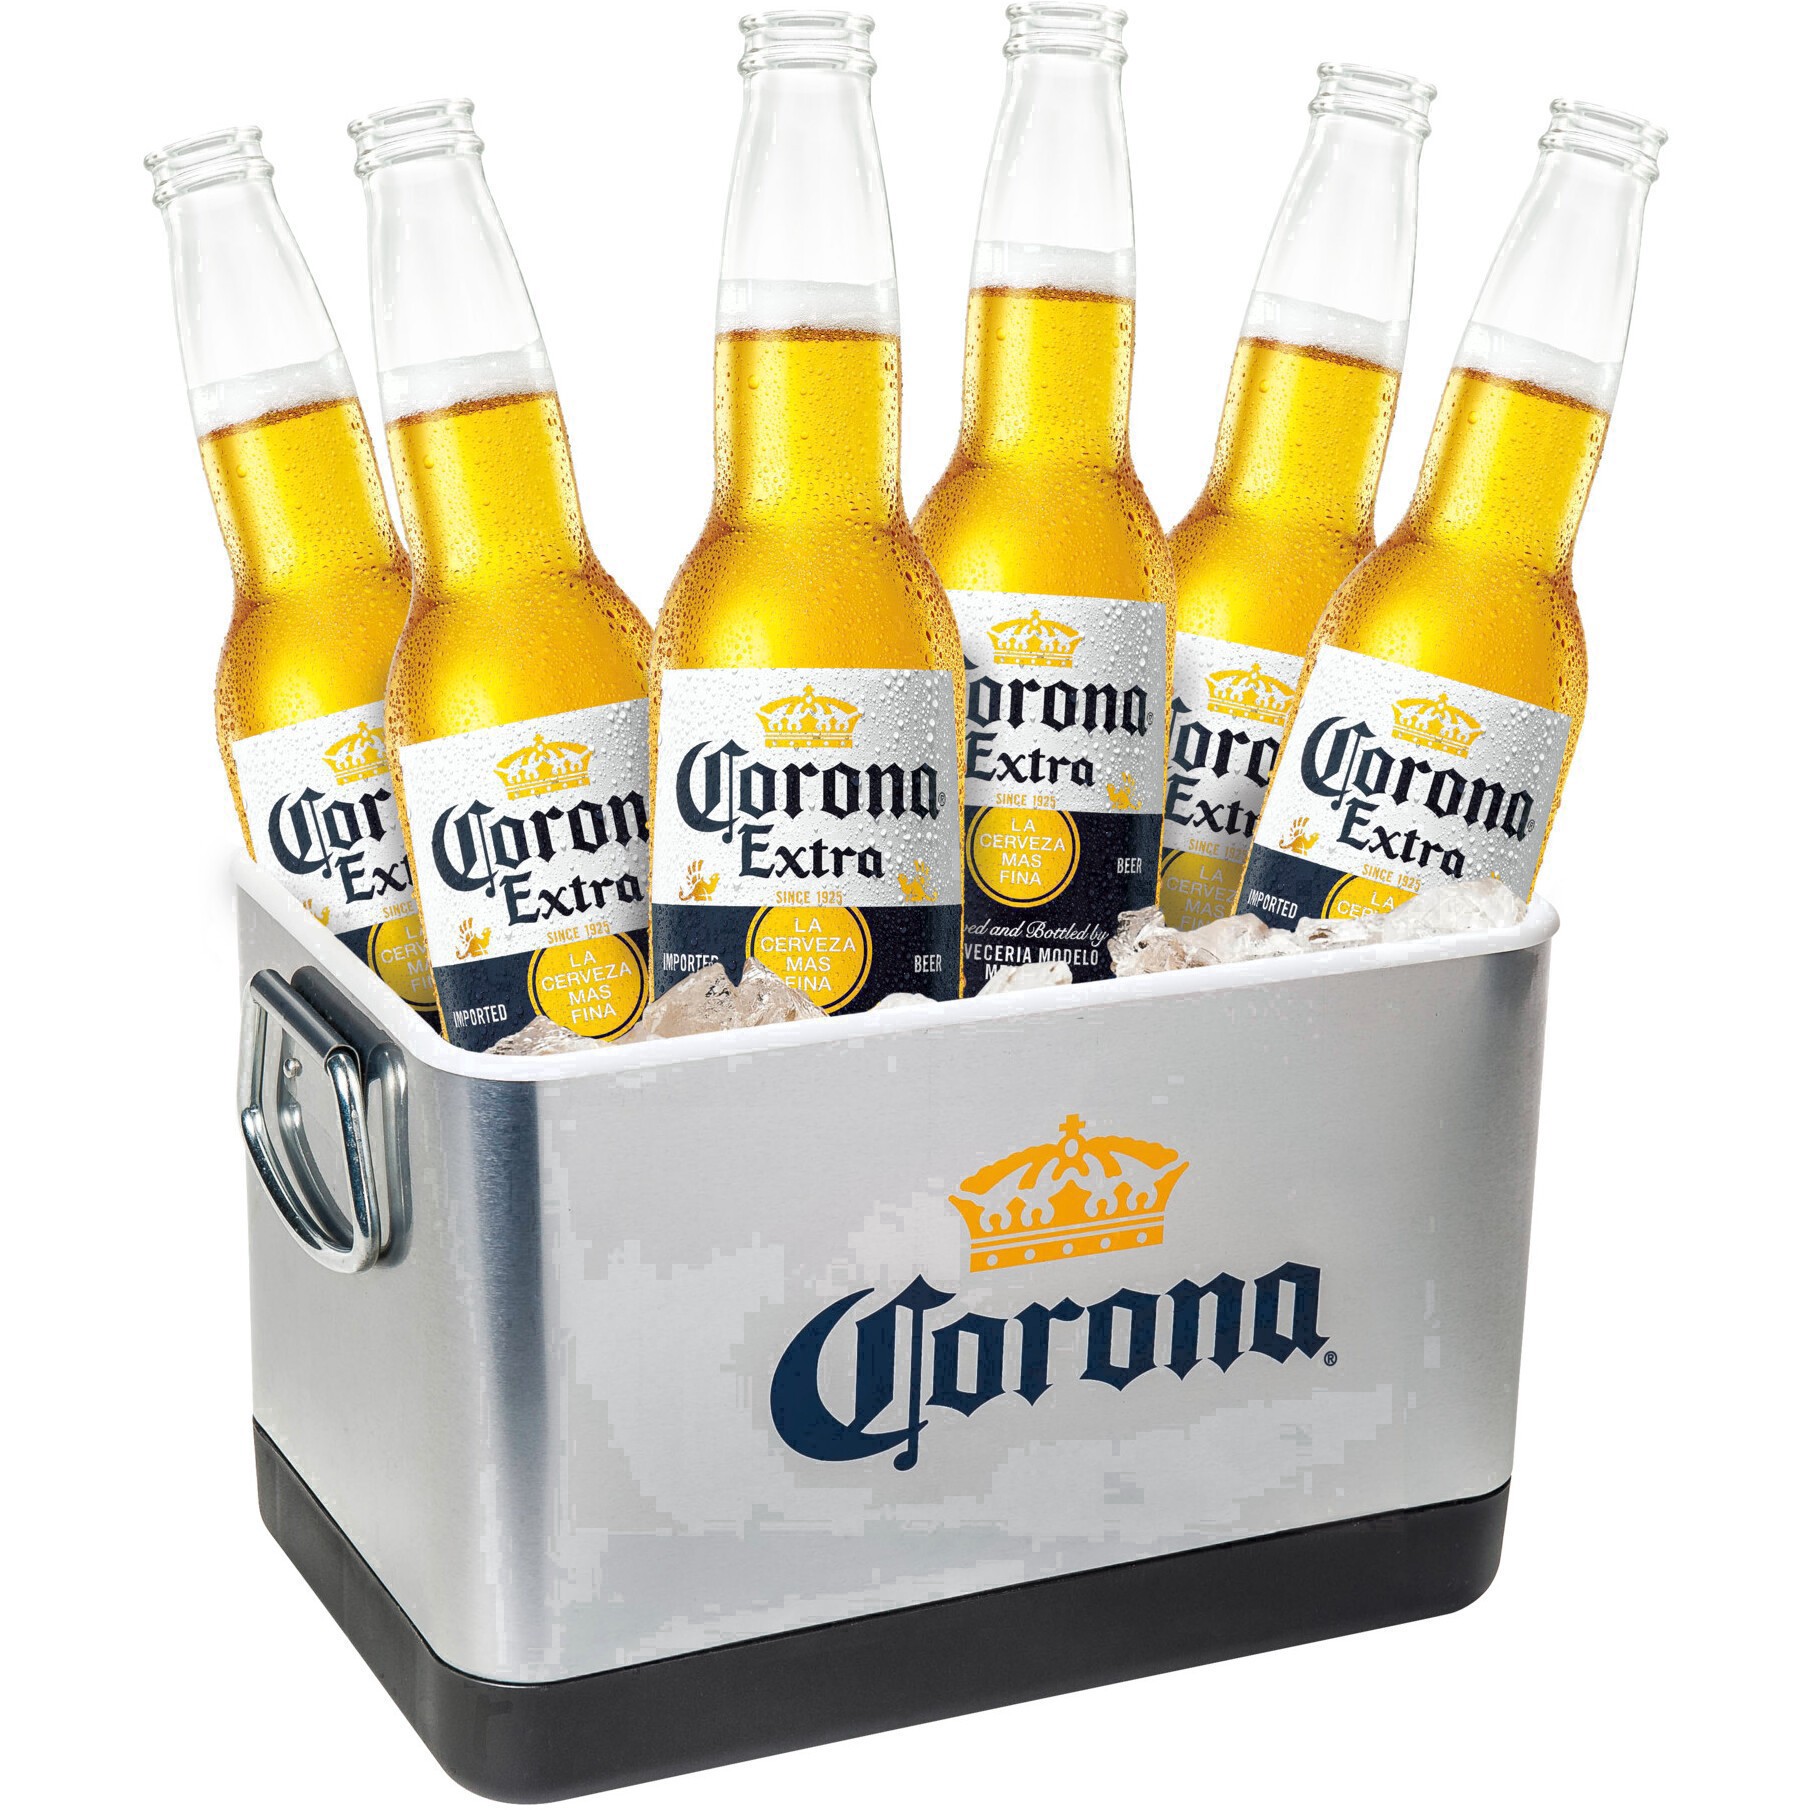 slide 12 of 98, Corona Extra Lager Mexican Beer Bottles, 12 oz